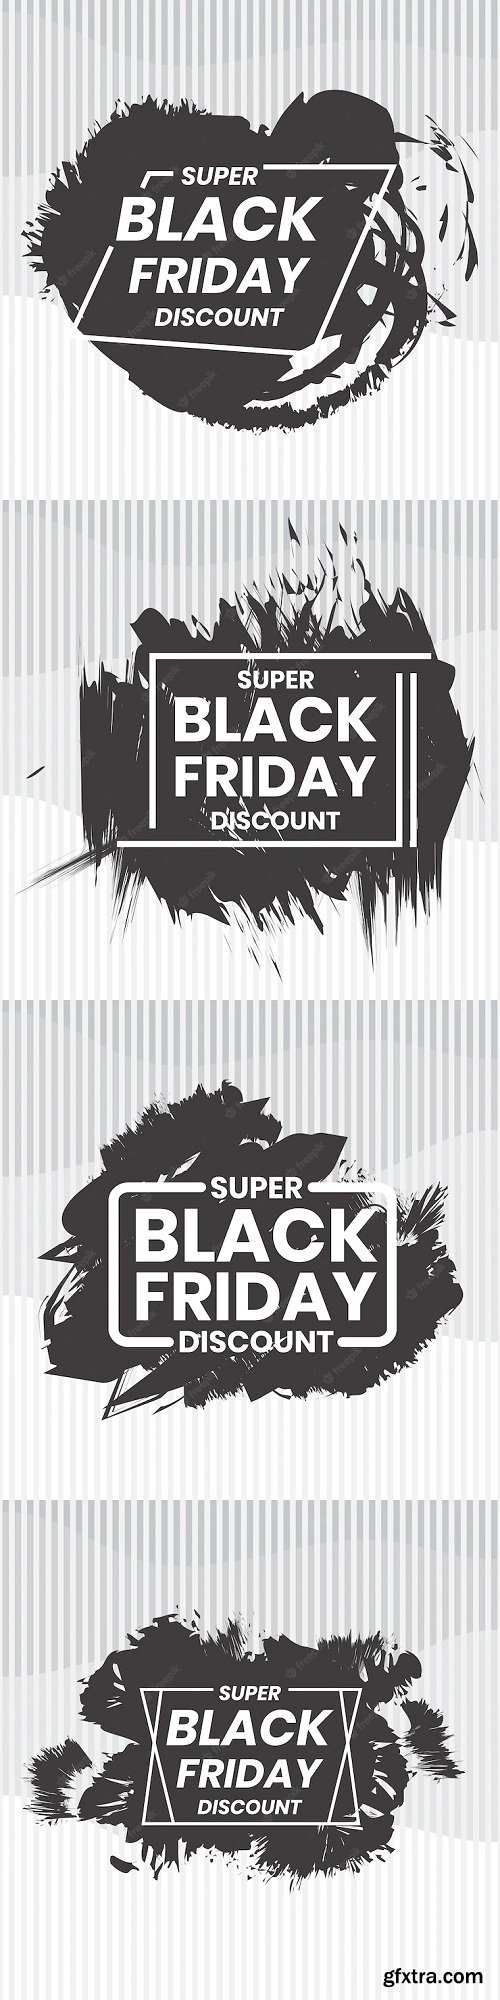 Black friday promotion or discount design set can be used for digital and print